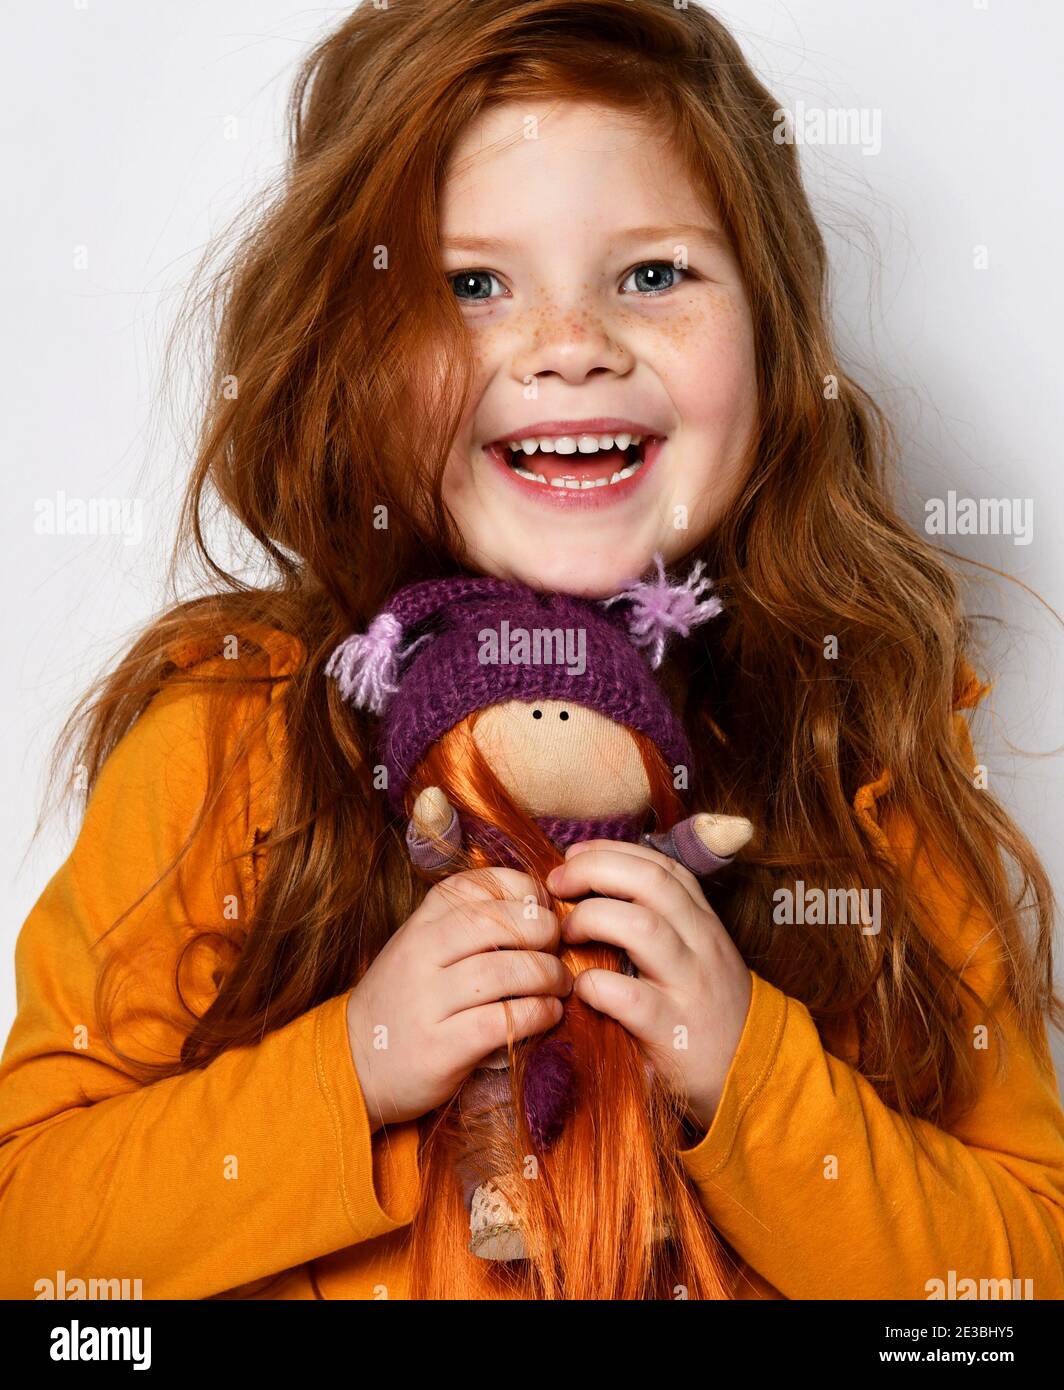 Little five-year-old red-haired girl smiles happily and holds a redhair doll in her hands in an orange sweater on white Stock Photo